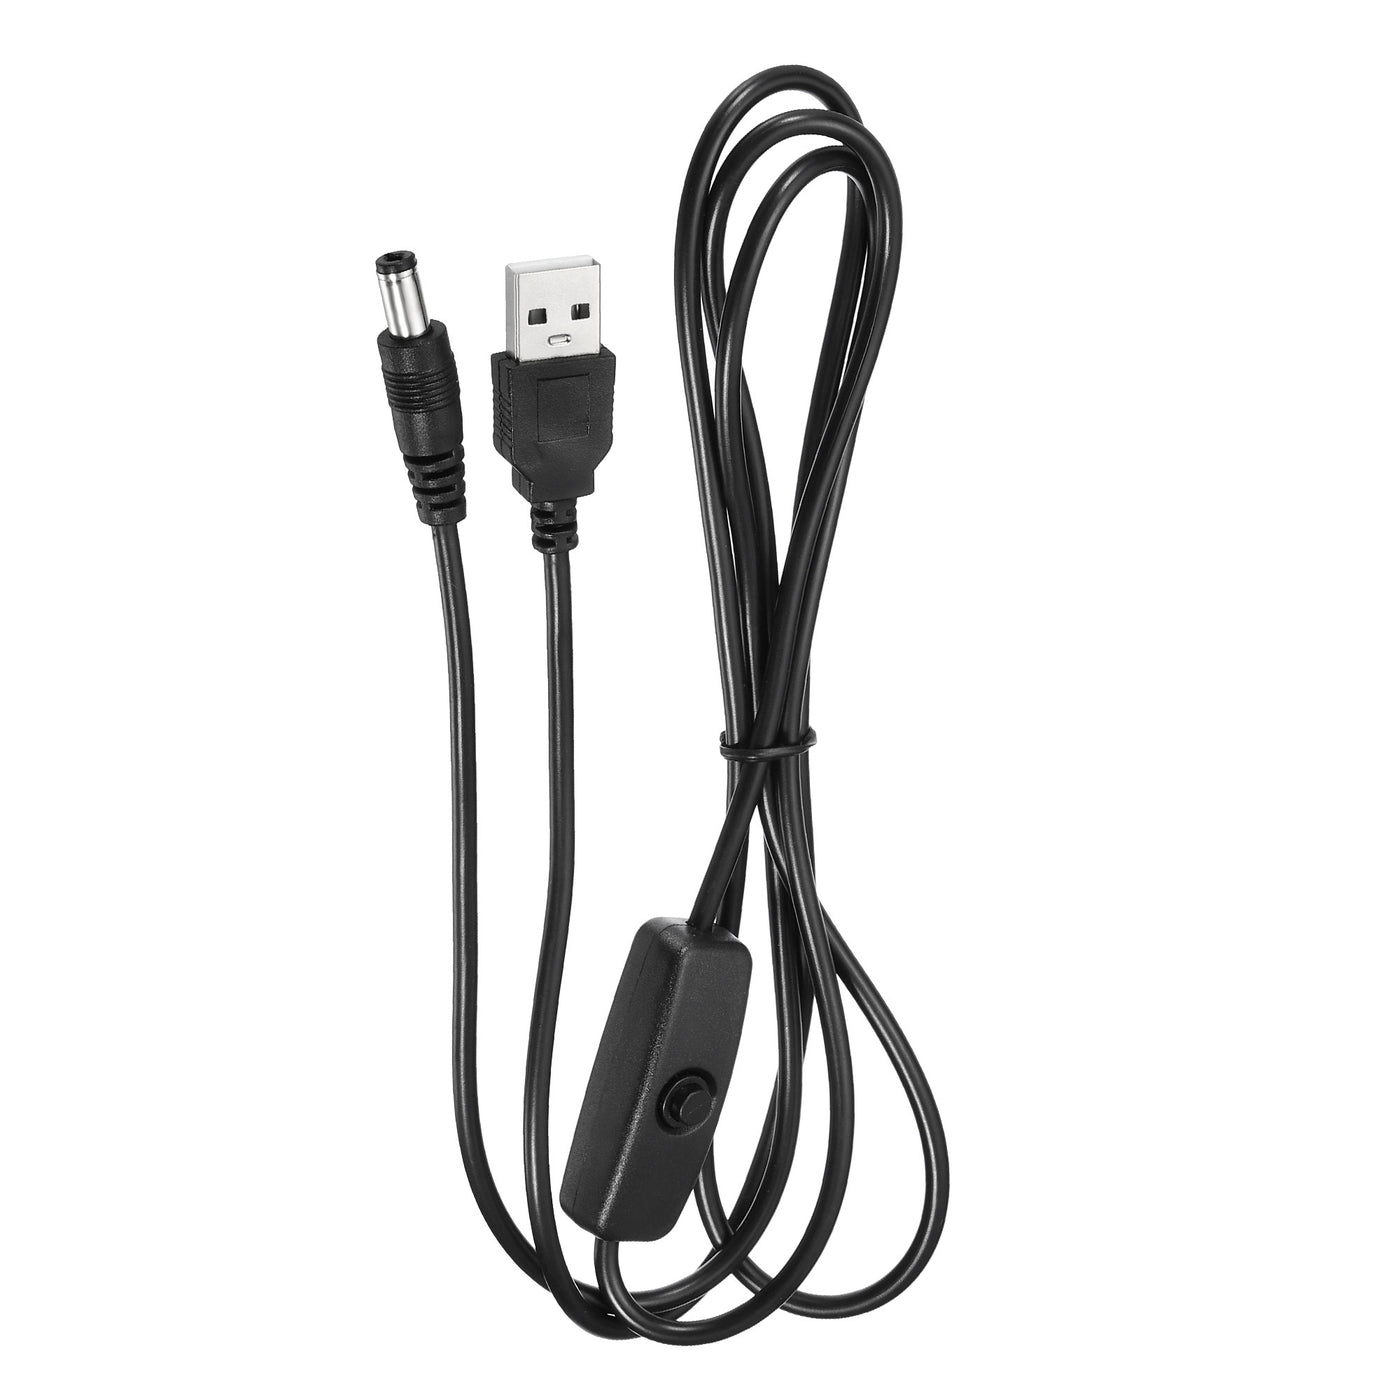 Harfington USB Cable with ON/Off Switch, USB Male to DC Male Power Cable for Camera Hard Disk Box